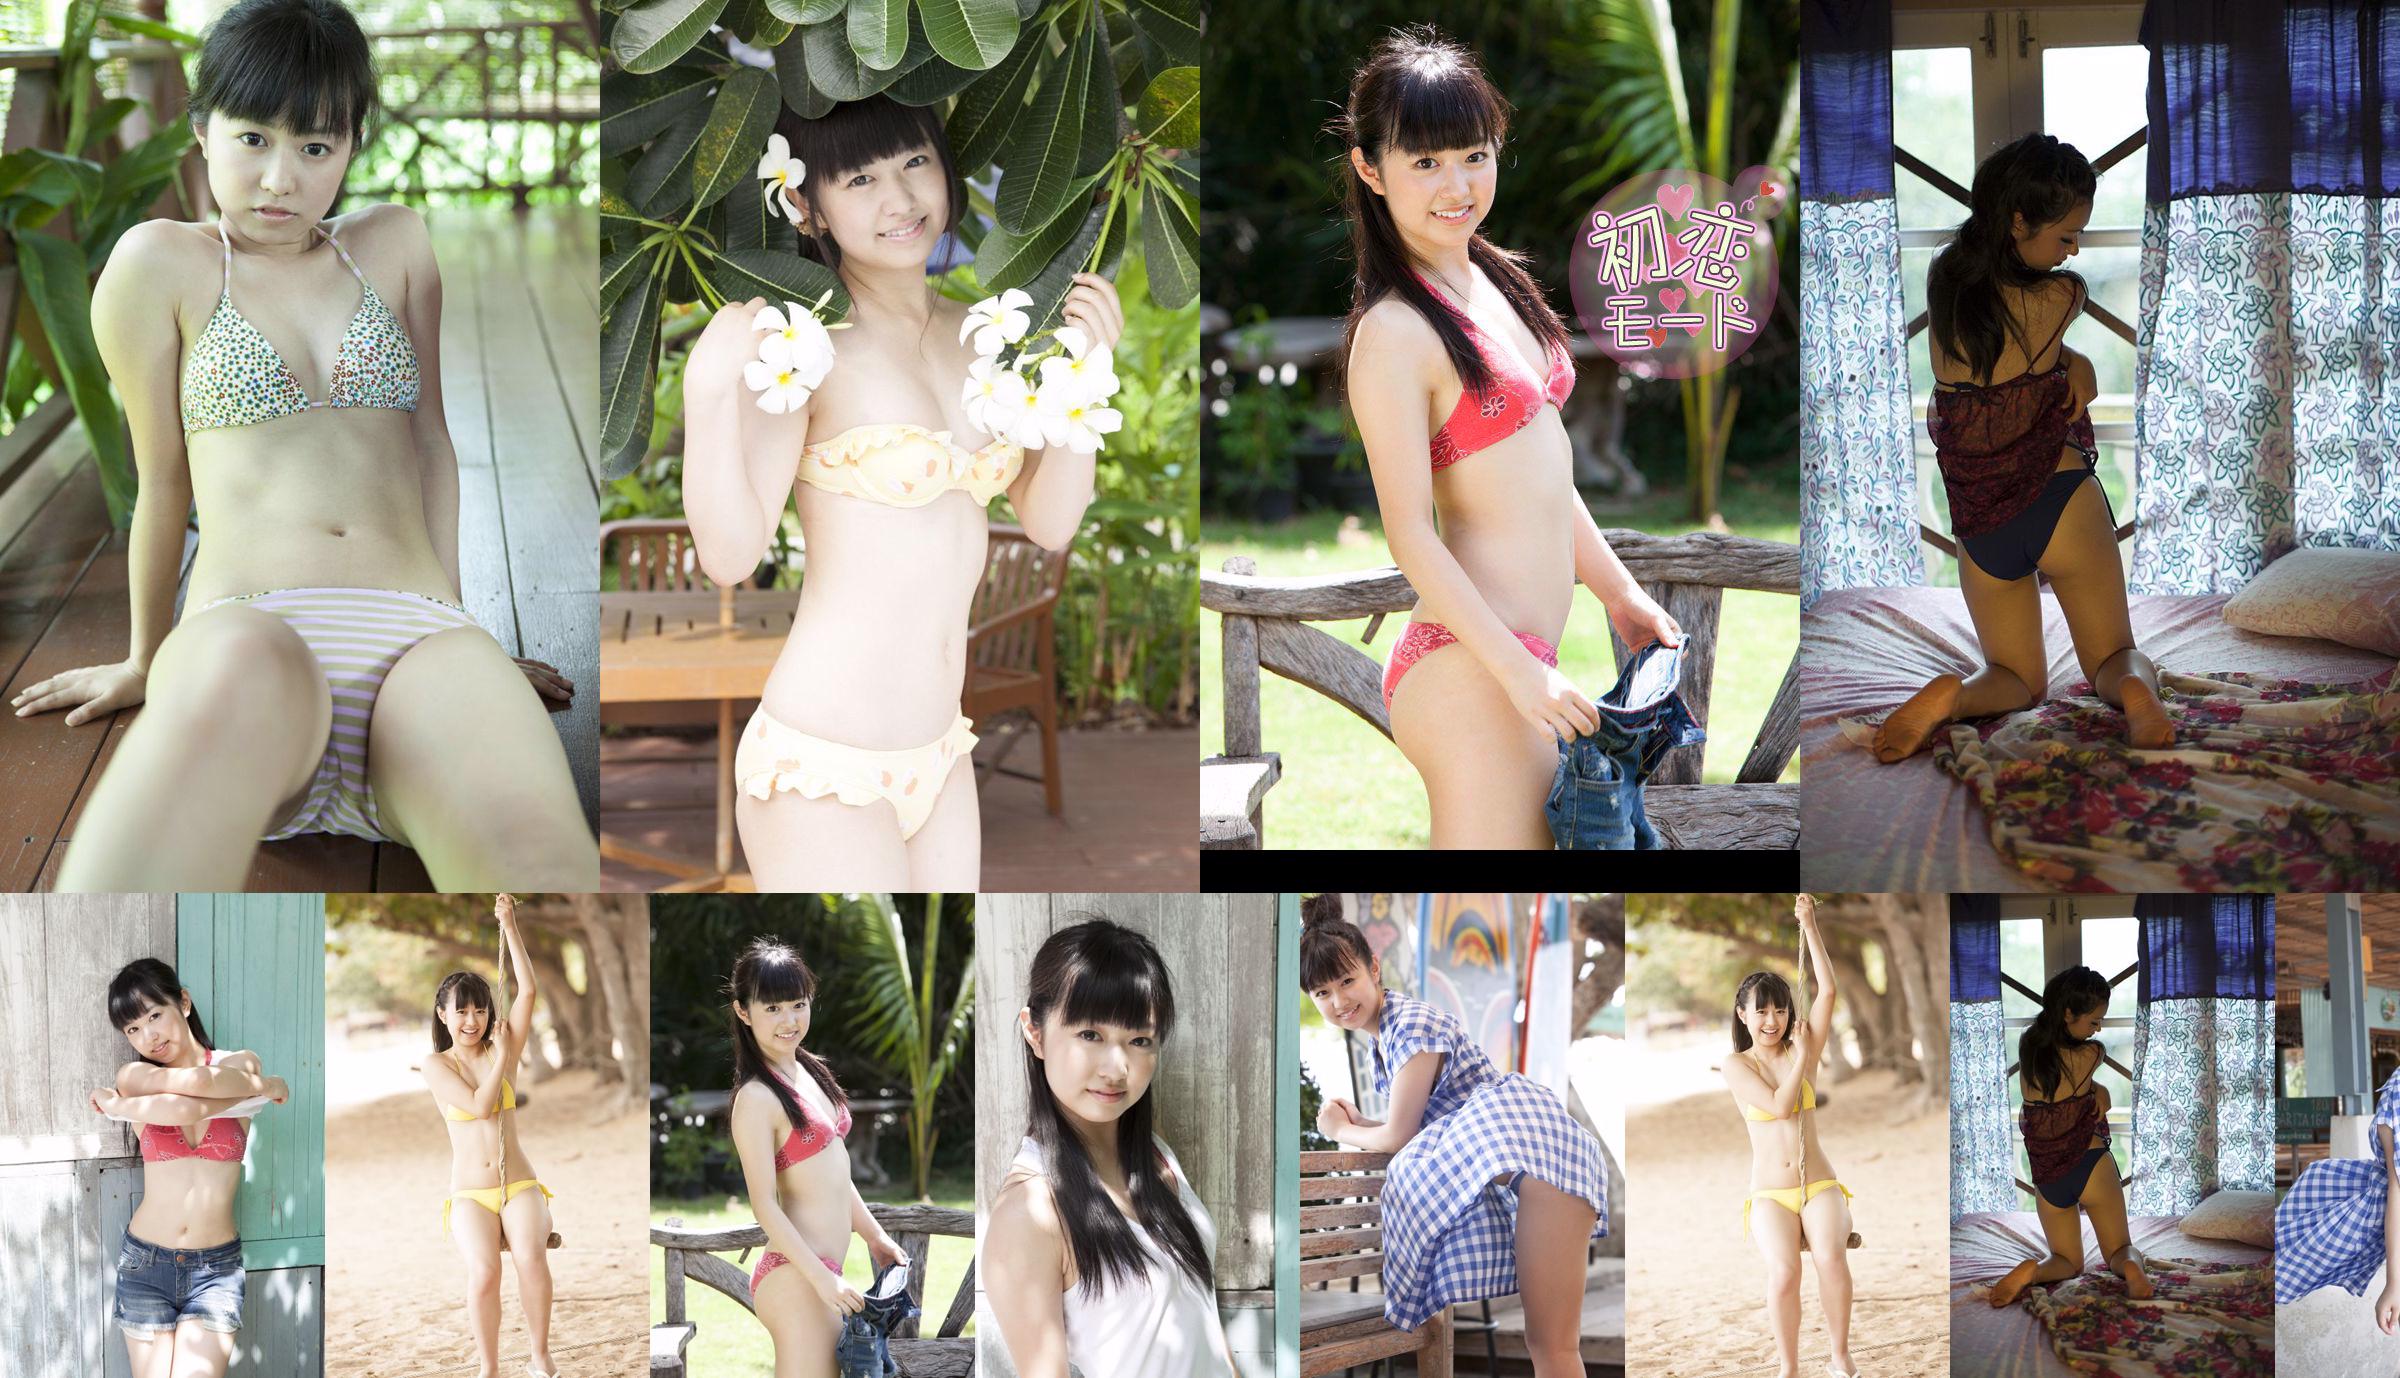 Ikura Aimi "First Love Mode" Part 1 [Image.tv] No.9d4033 Page 1